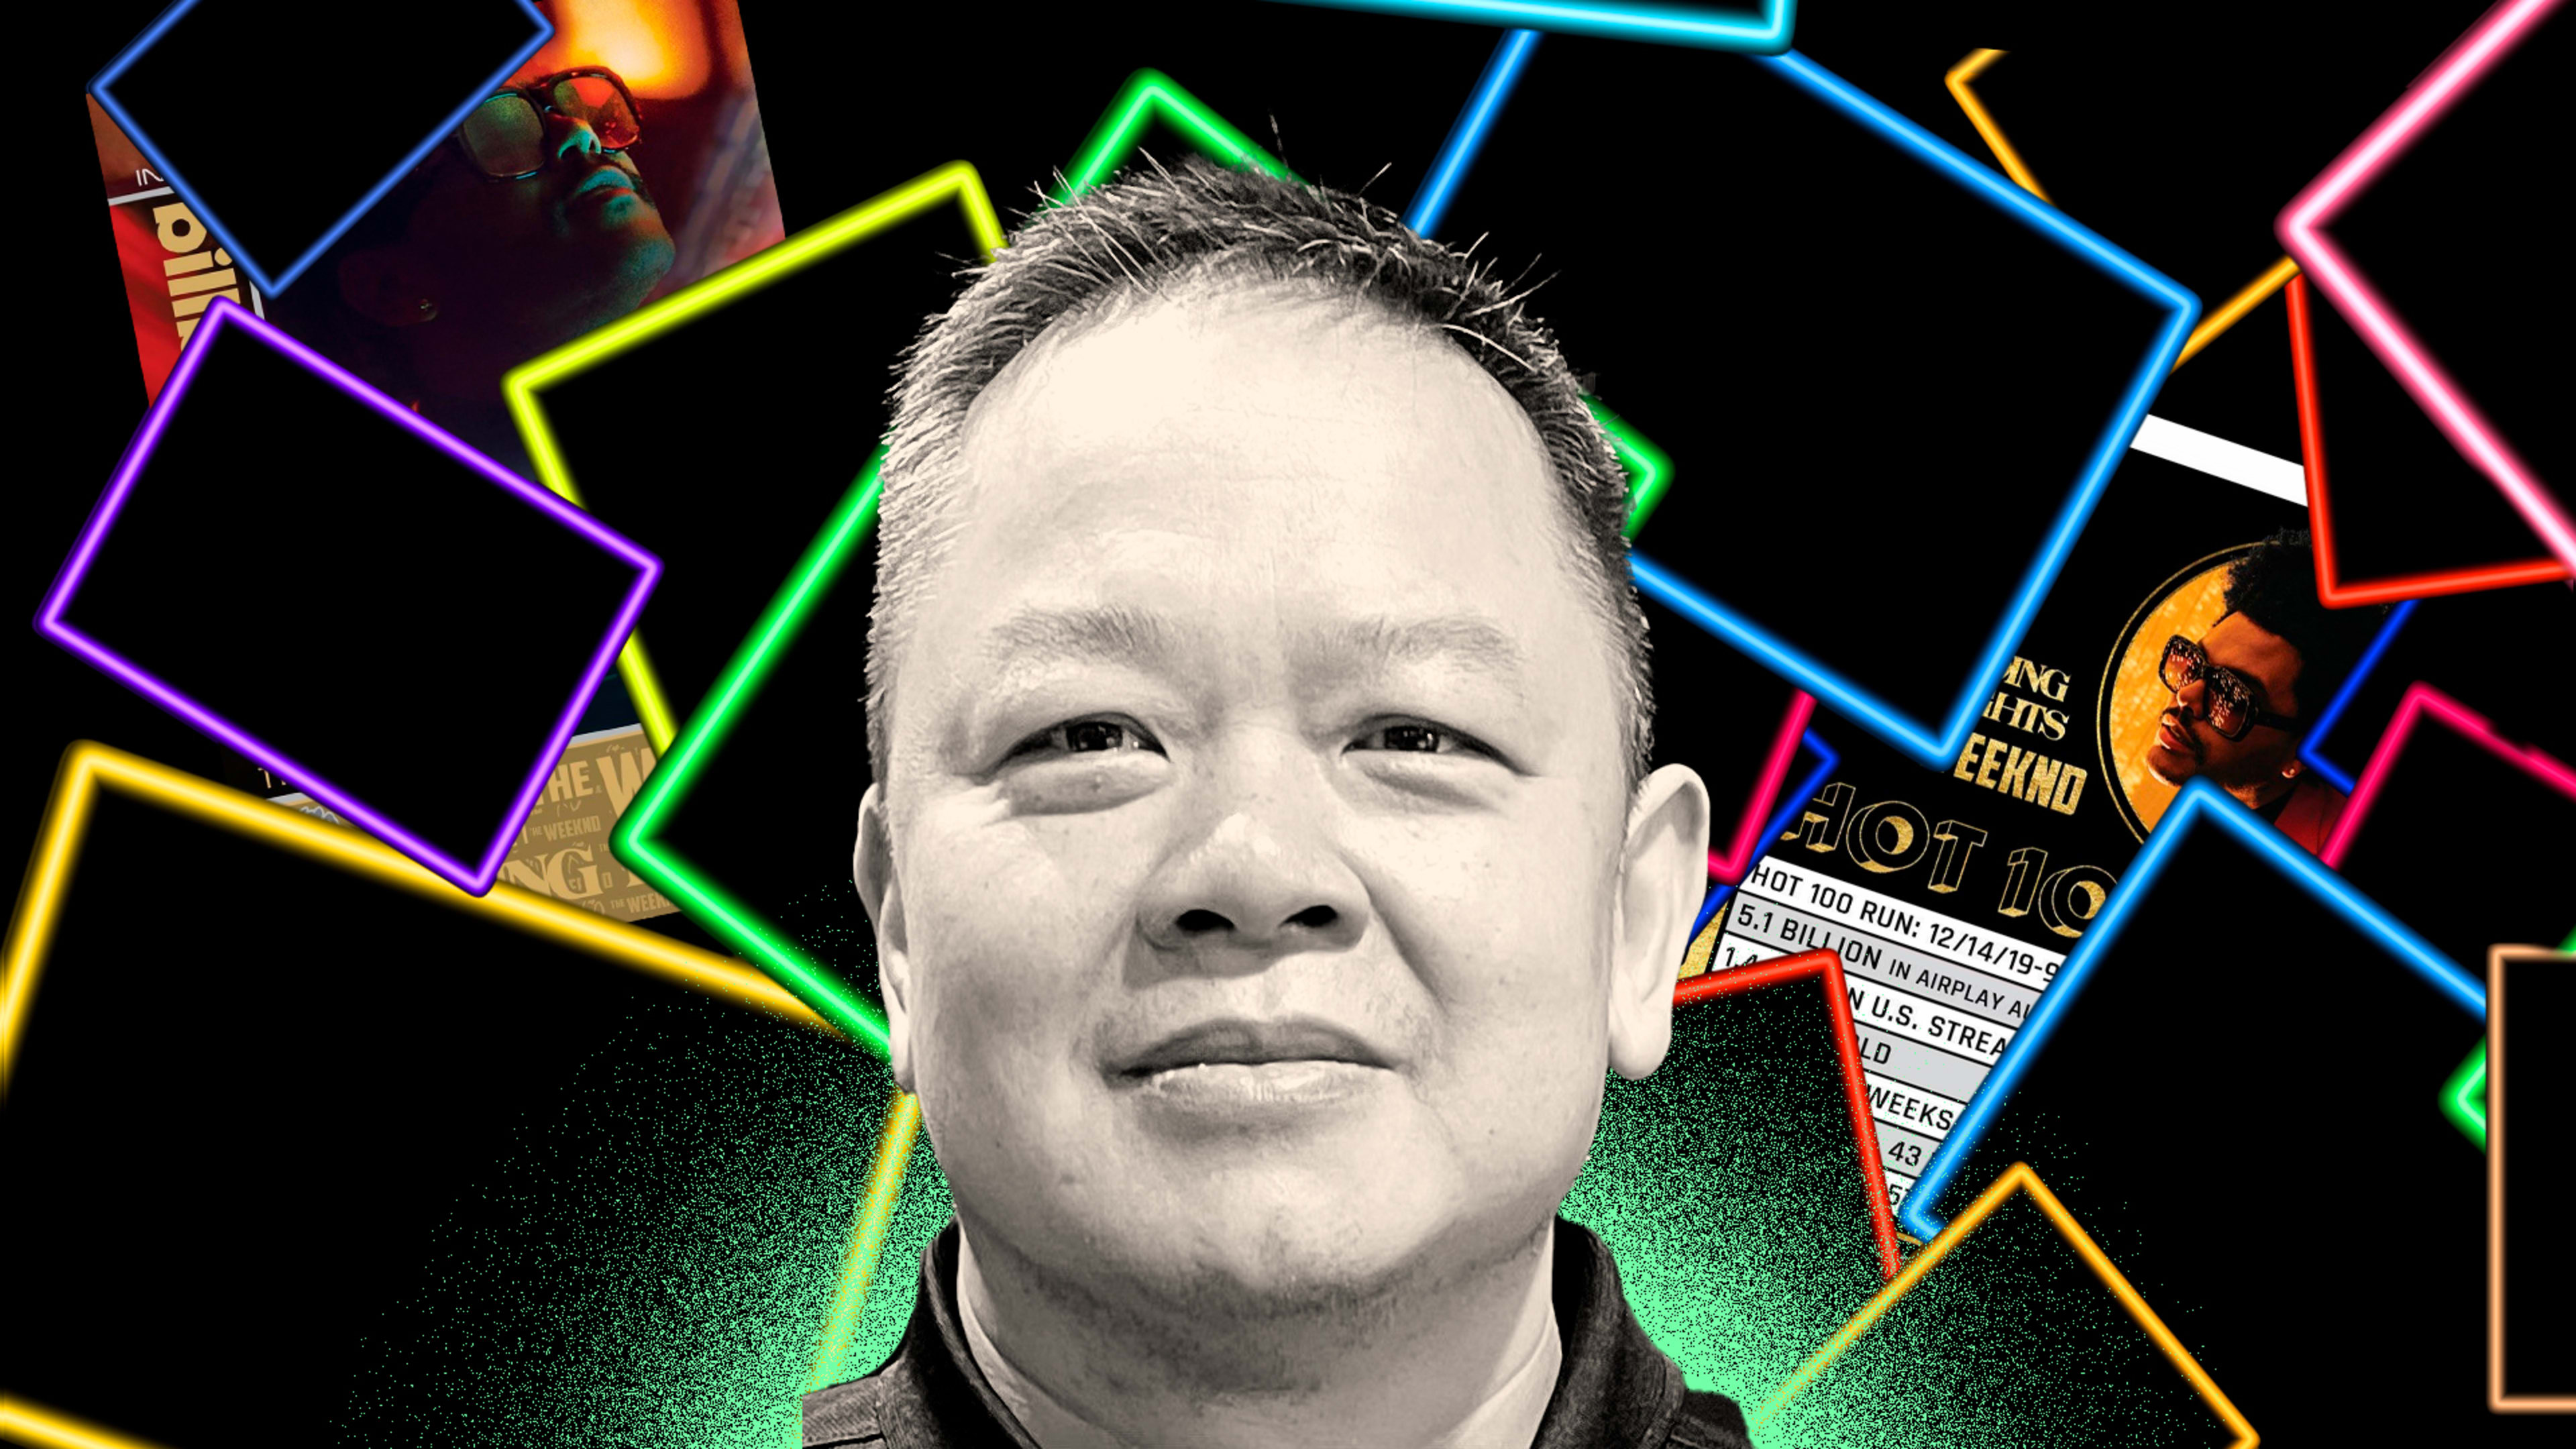 Sports-card pioneer Karvin Cheung is reimagining NFTs